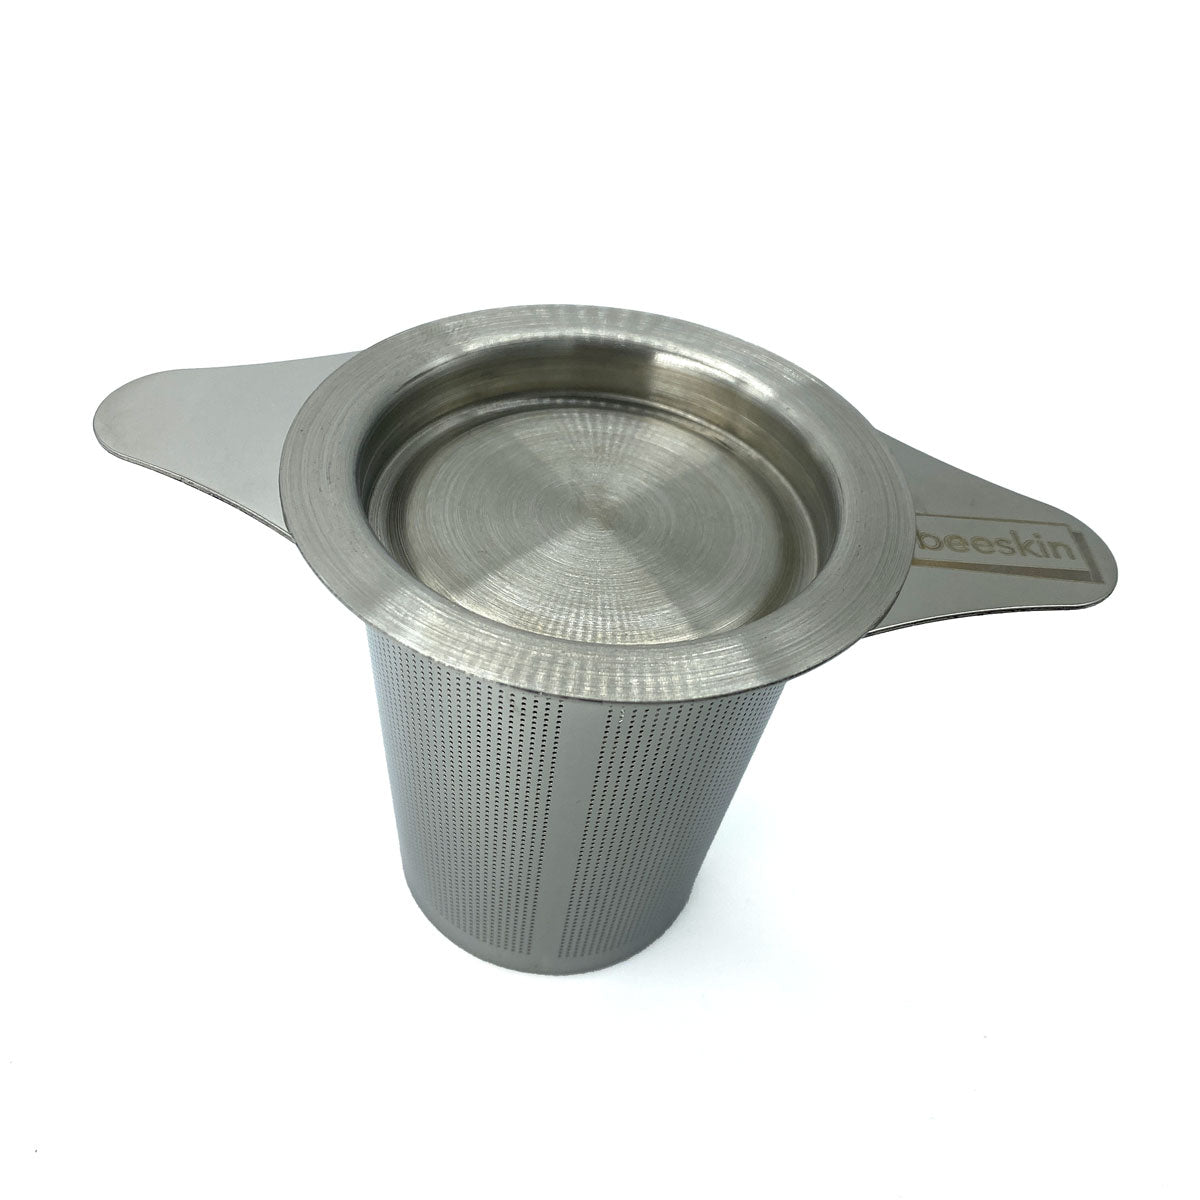 tea infuser from above with beeskin logo and cap